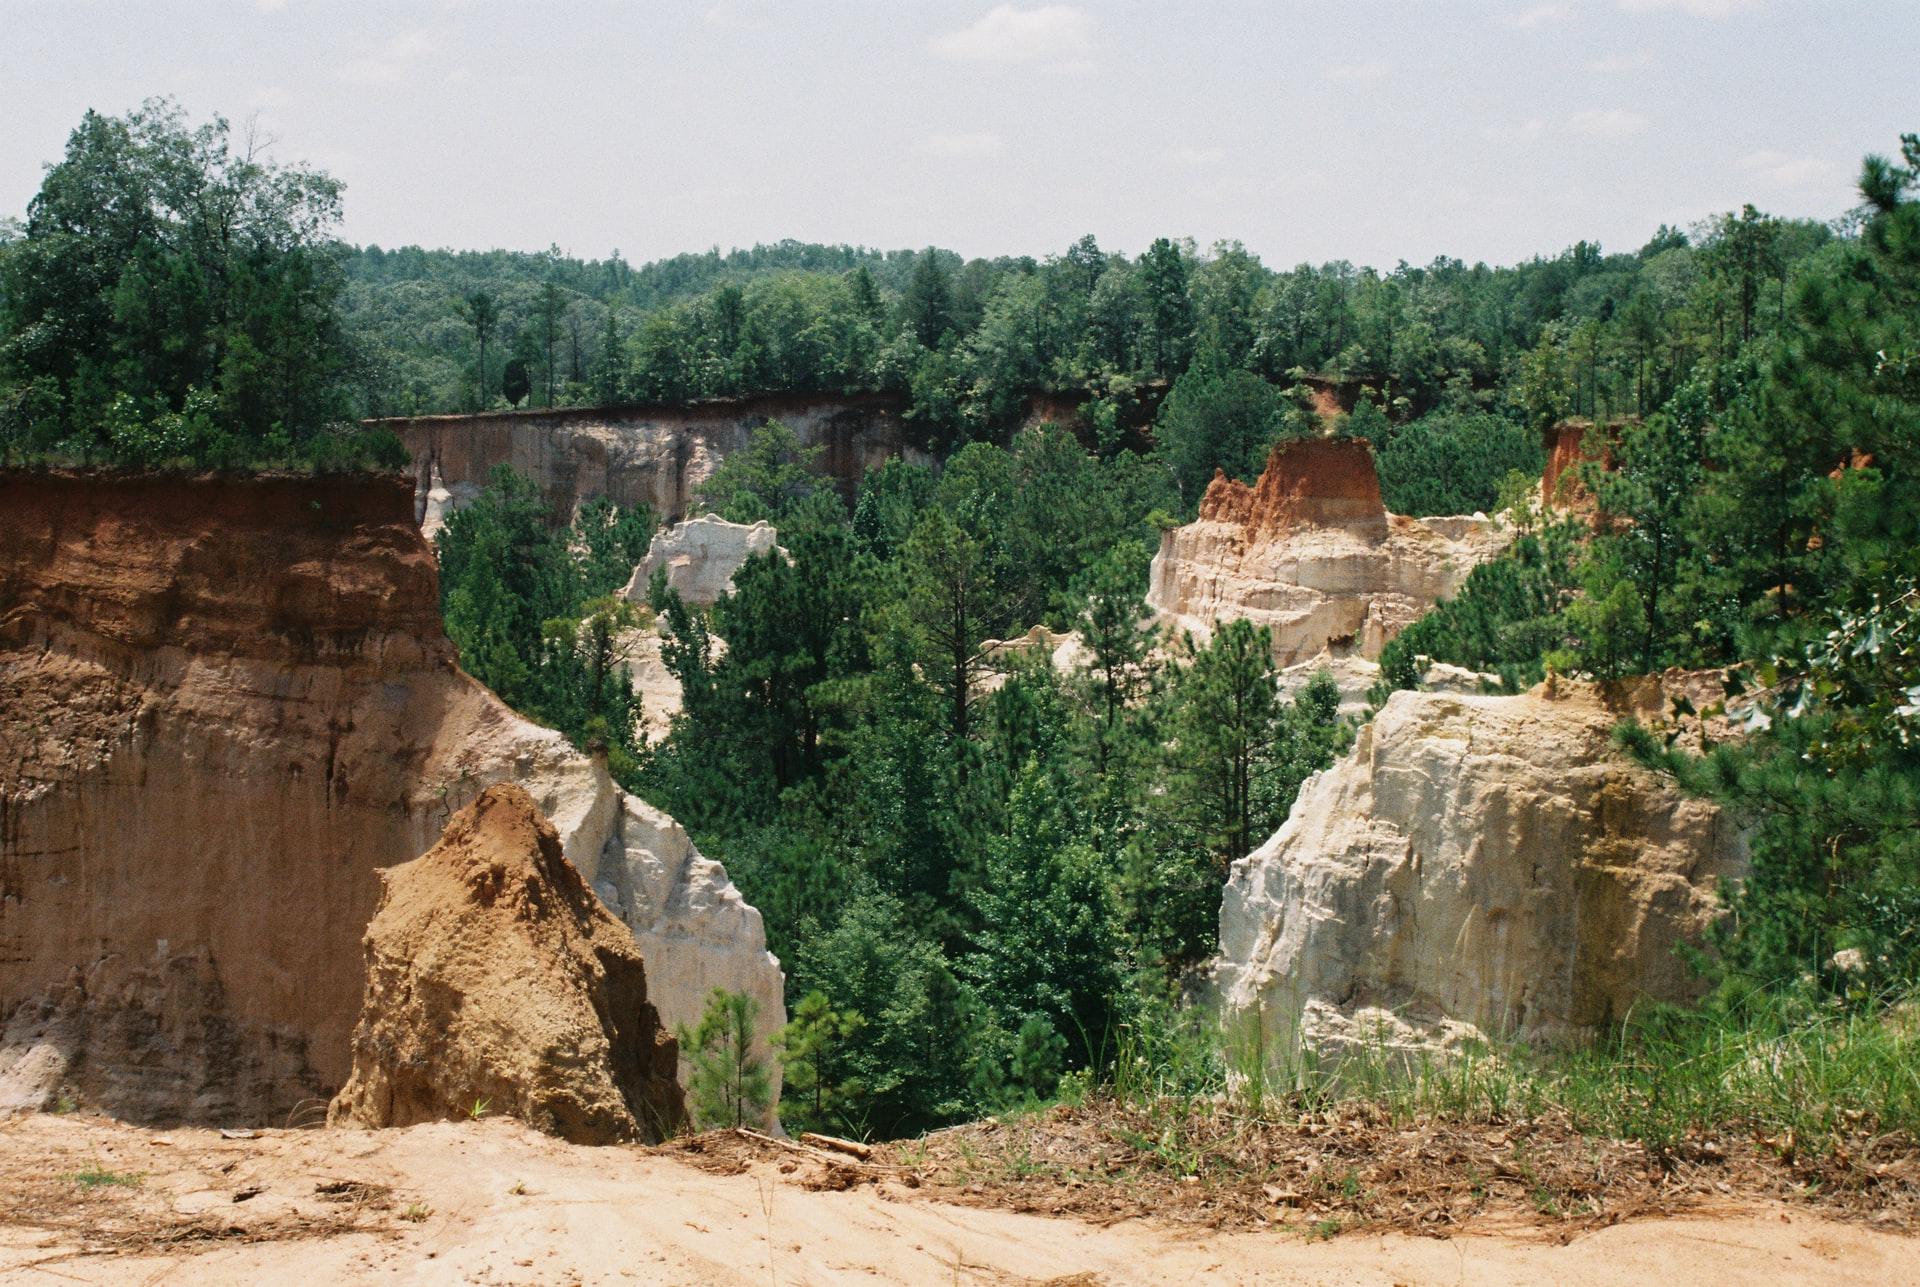 Providence Canyon in Georgia, which was formed by geological changes in the area